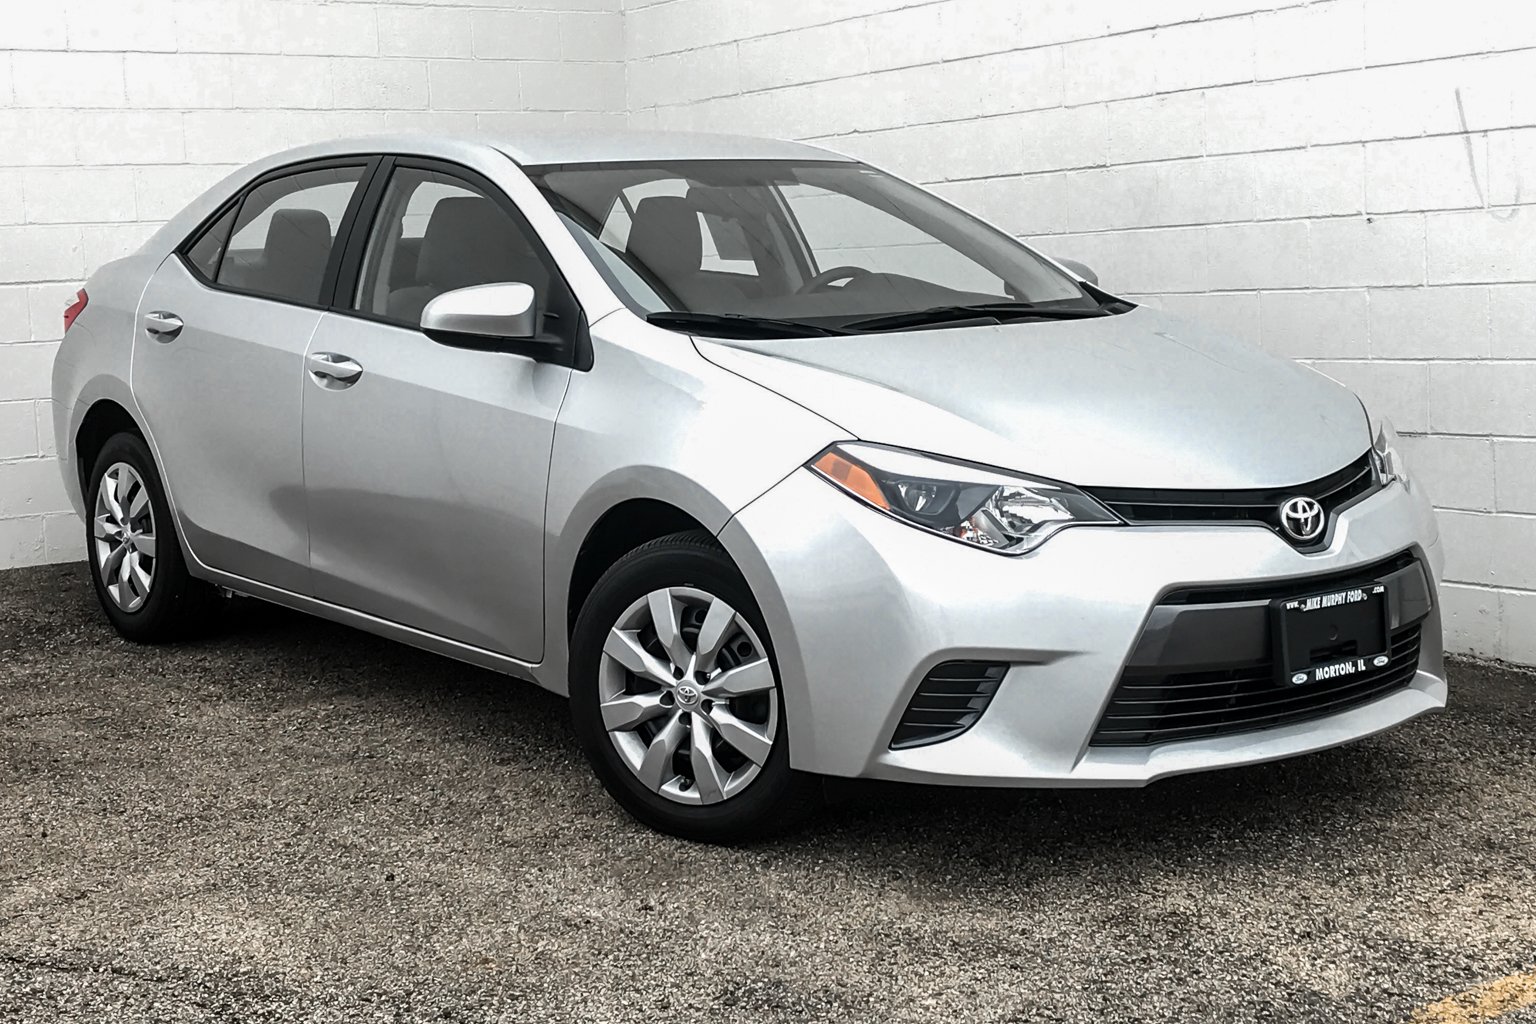 Pre-Owned 2016 Toyota Corolla LE 4dr Car in Morton #620428 | Mike